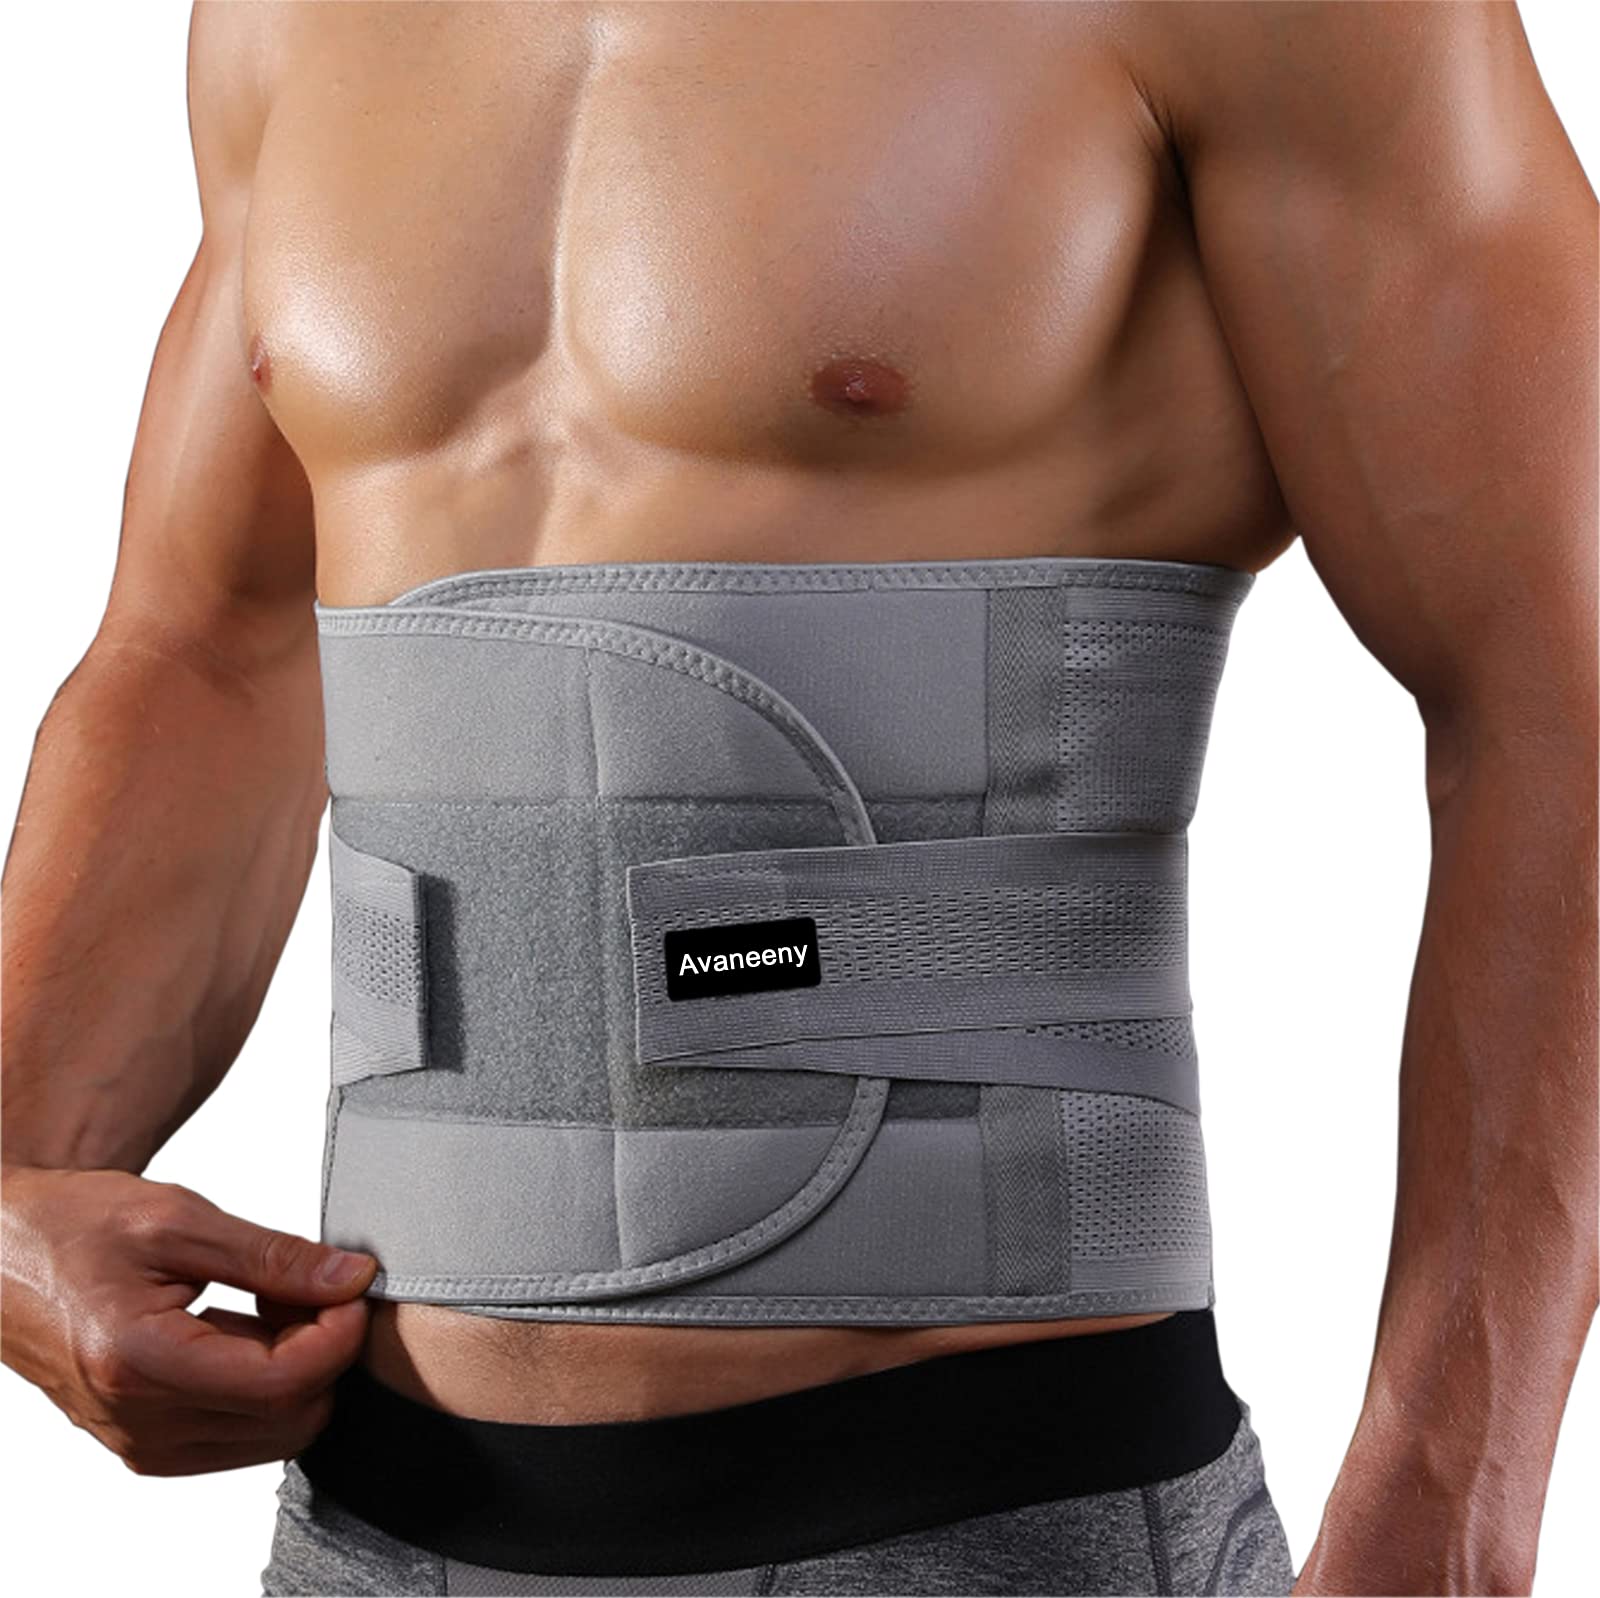 T TIMTAKBO 2.0 Version Lower Back Brace For Pain Relief, Back Brace For  Lifting At Work, Back Brace For Herniated Disc And Sciatica, Back Support  Belt